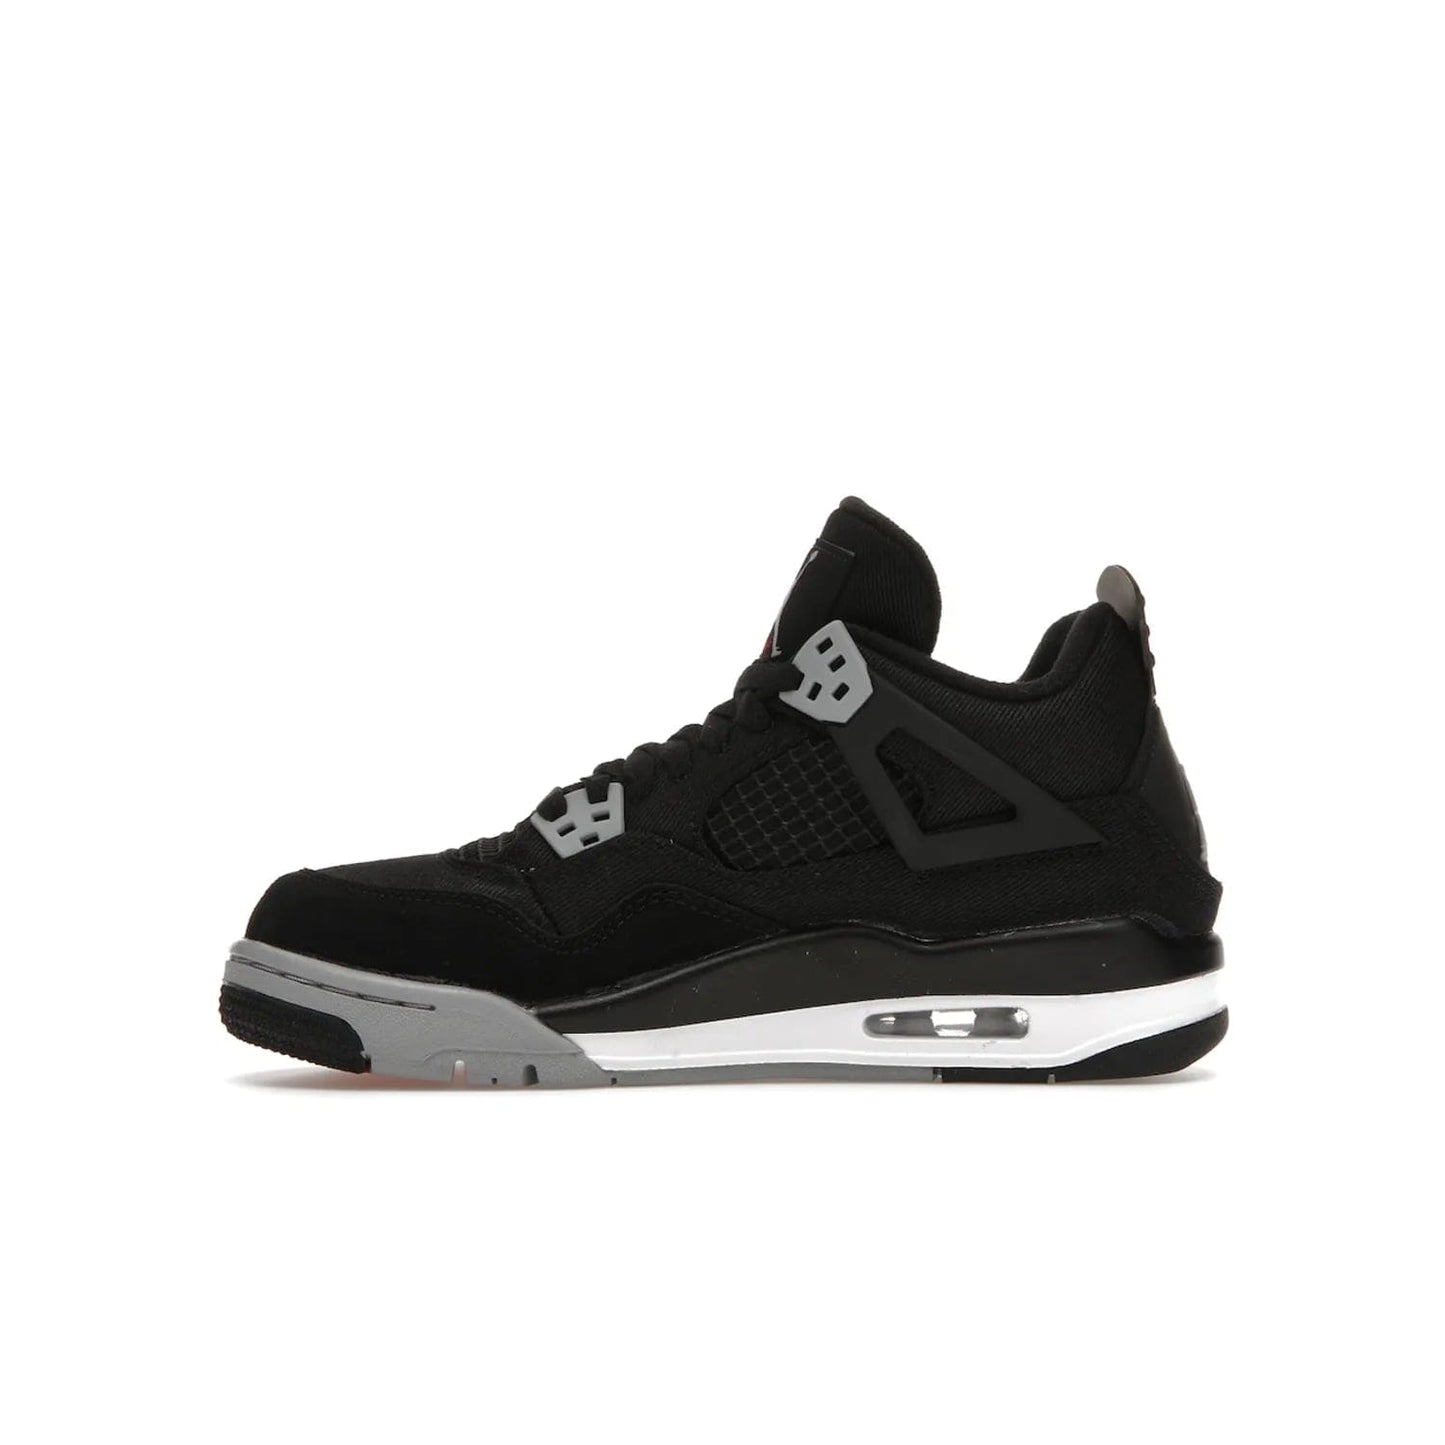 Jordan 4 Retro Black Canvas (GS) - Image 19 - Only at www.BallersClubKickz.com - Premium Air Jordan 4 Retro Black Canvas in grade-schooler's catalog. Featuring black suede canvas upper, grey molding, accents in red, white midsole, woven Jumpman tag, & visible AIR cushioning. Releasing Oct. 1, 2022.